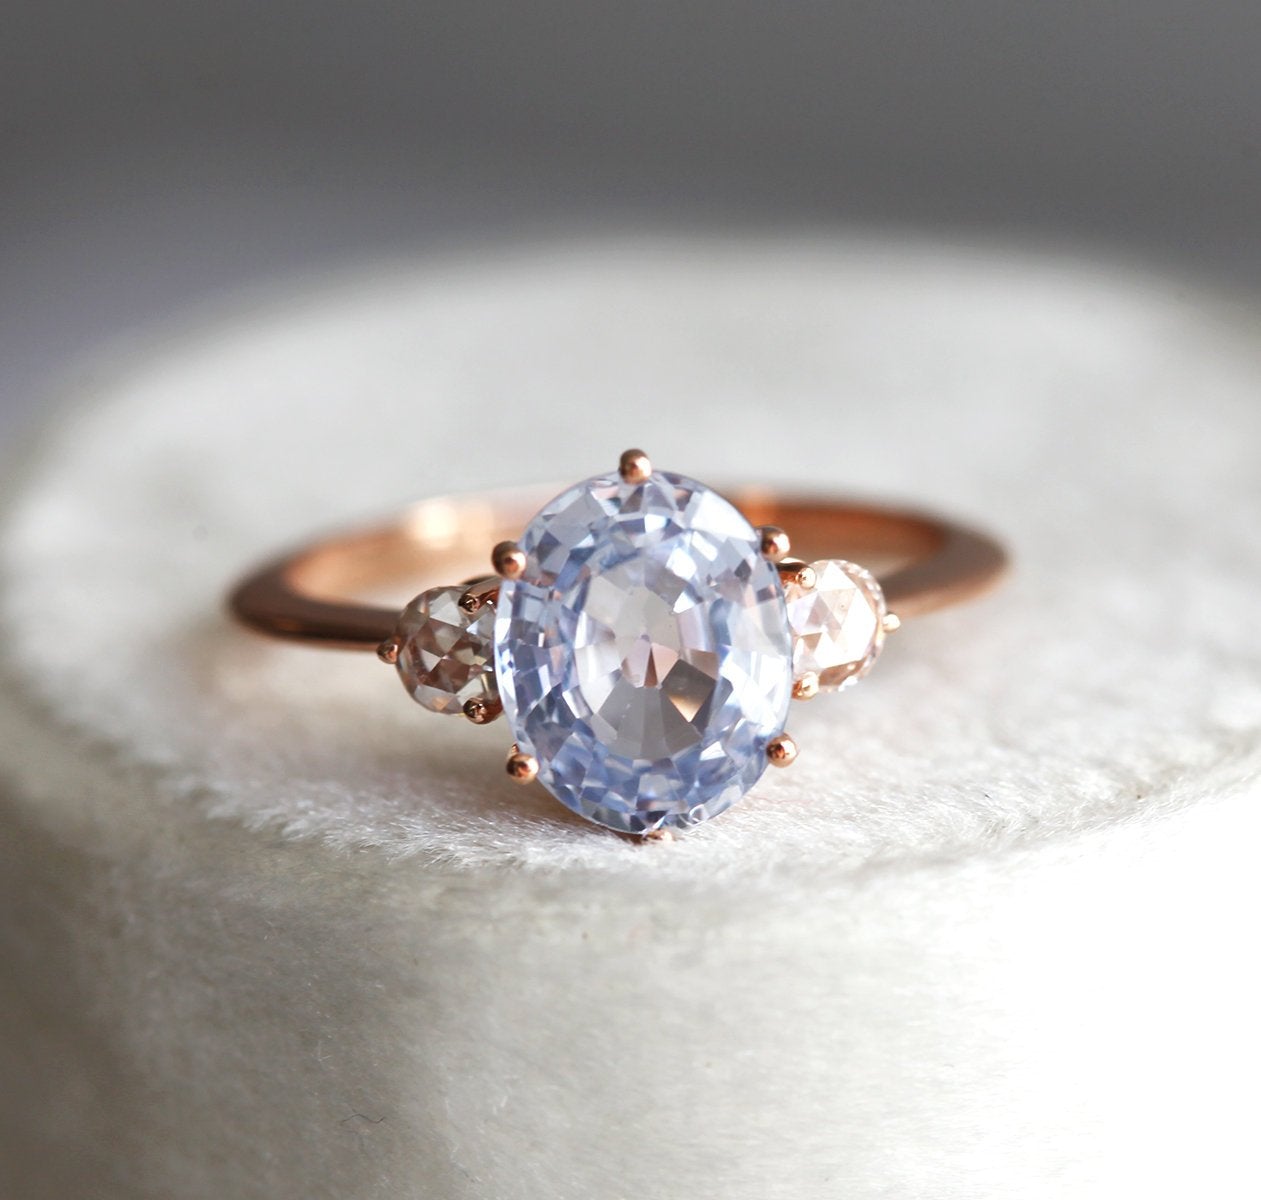 Oval sapphire ring with white side diamonds